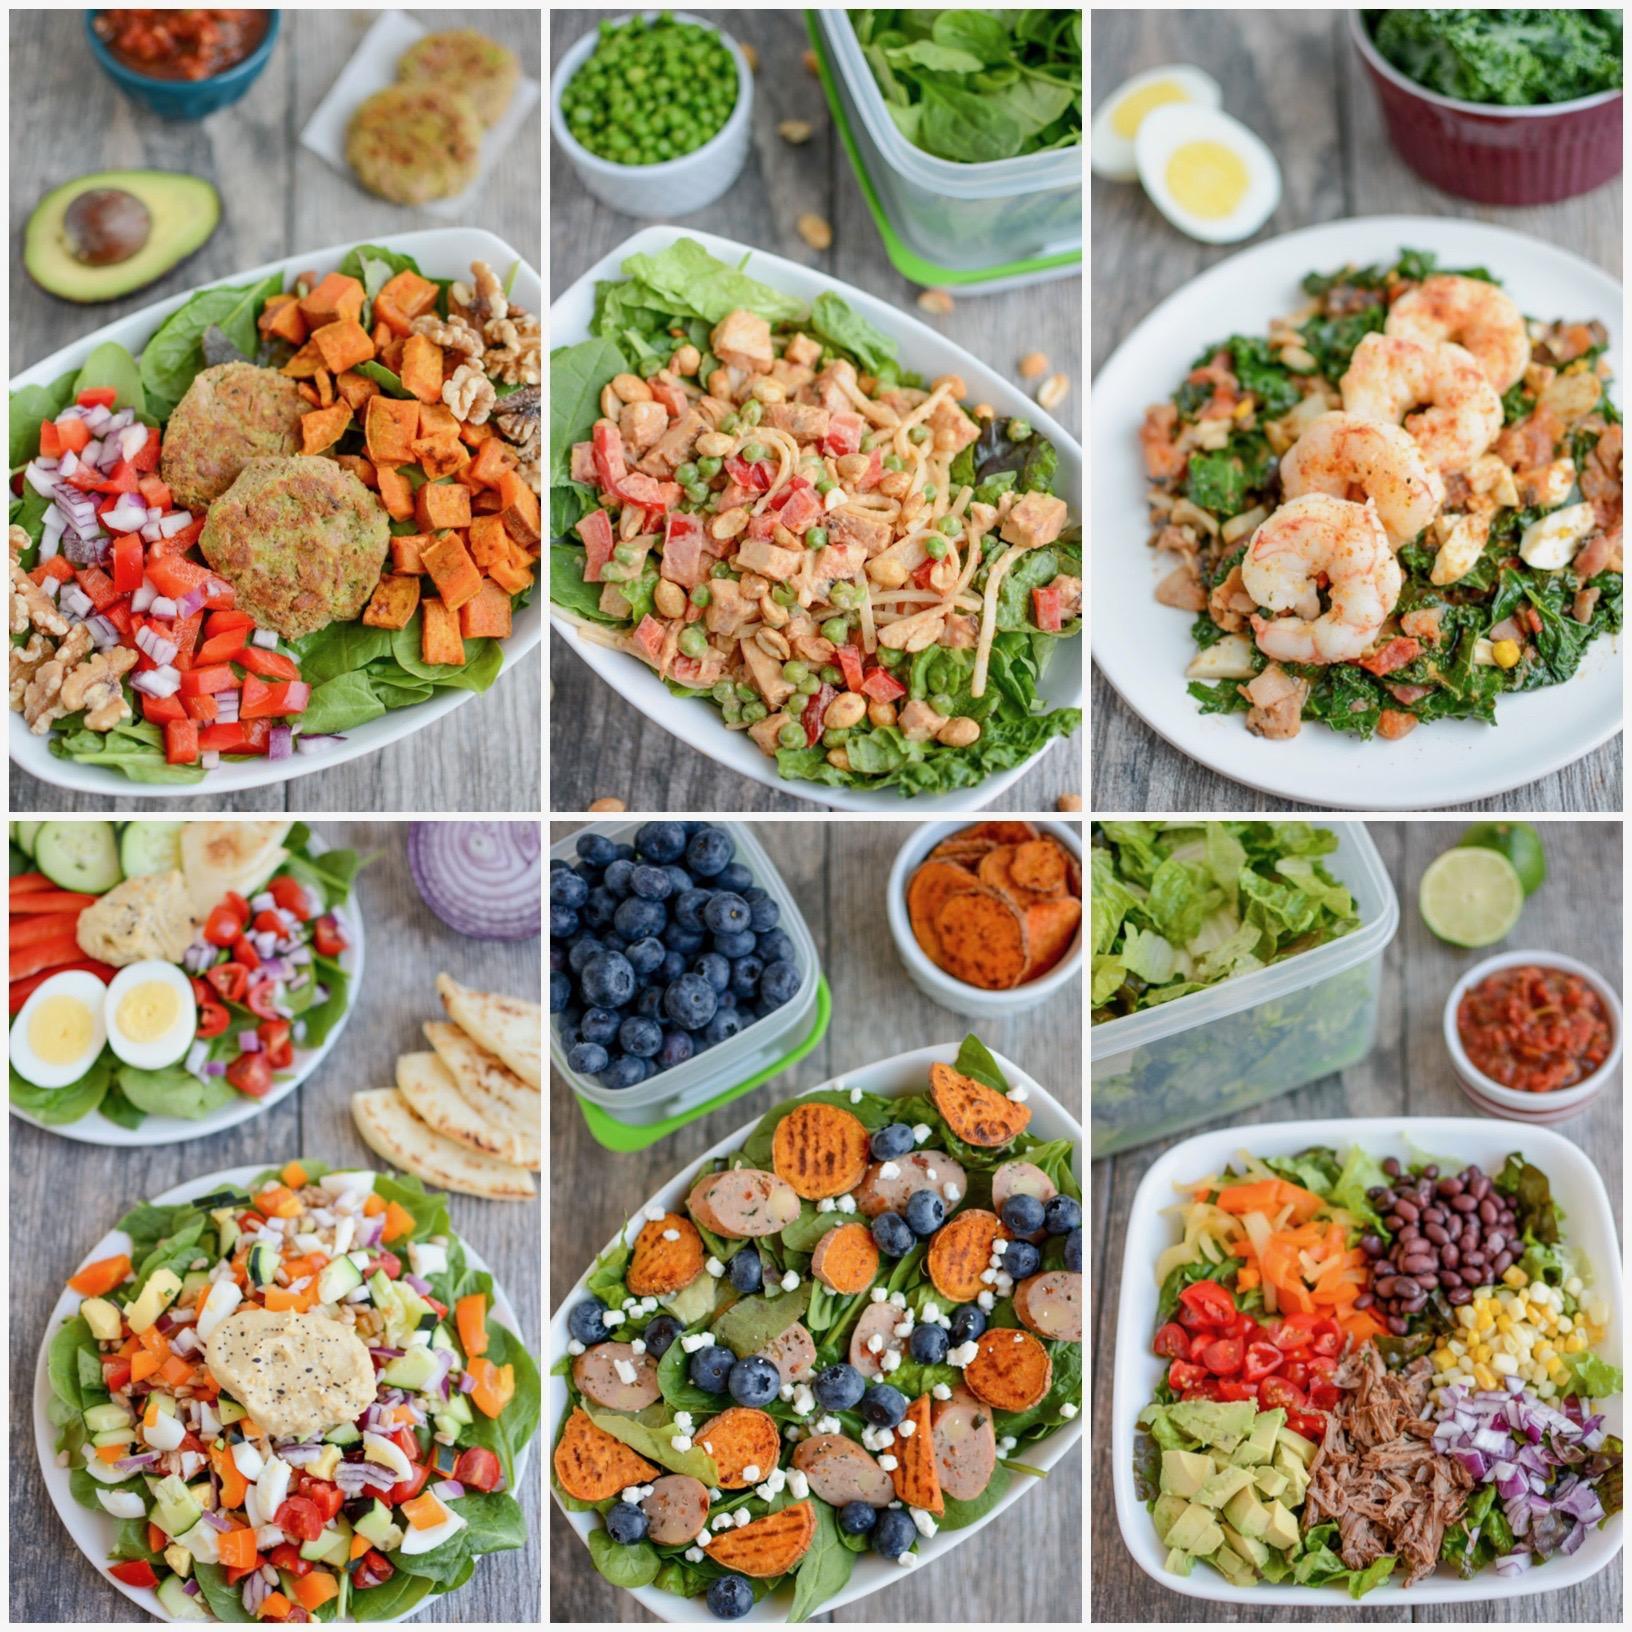 More Salad Toppings - Order Online & Save